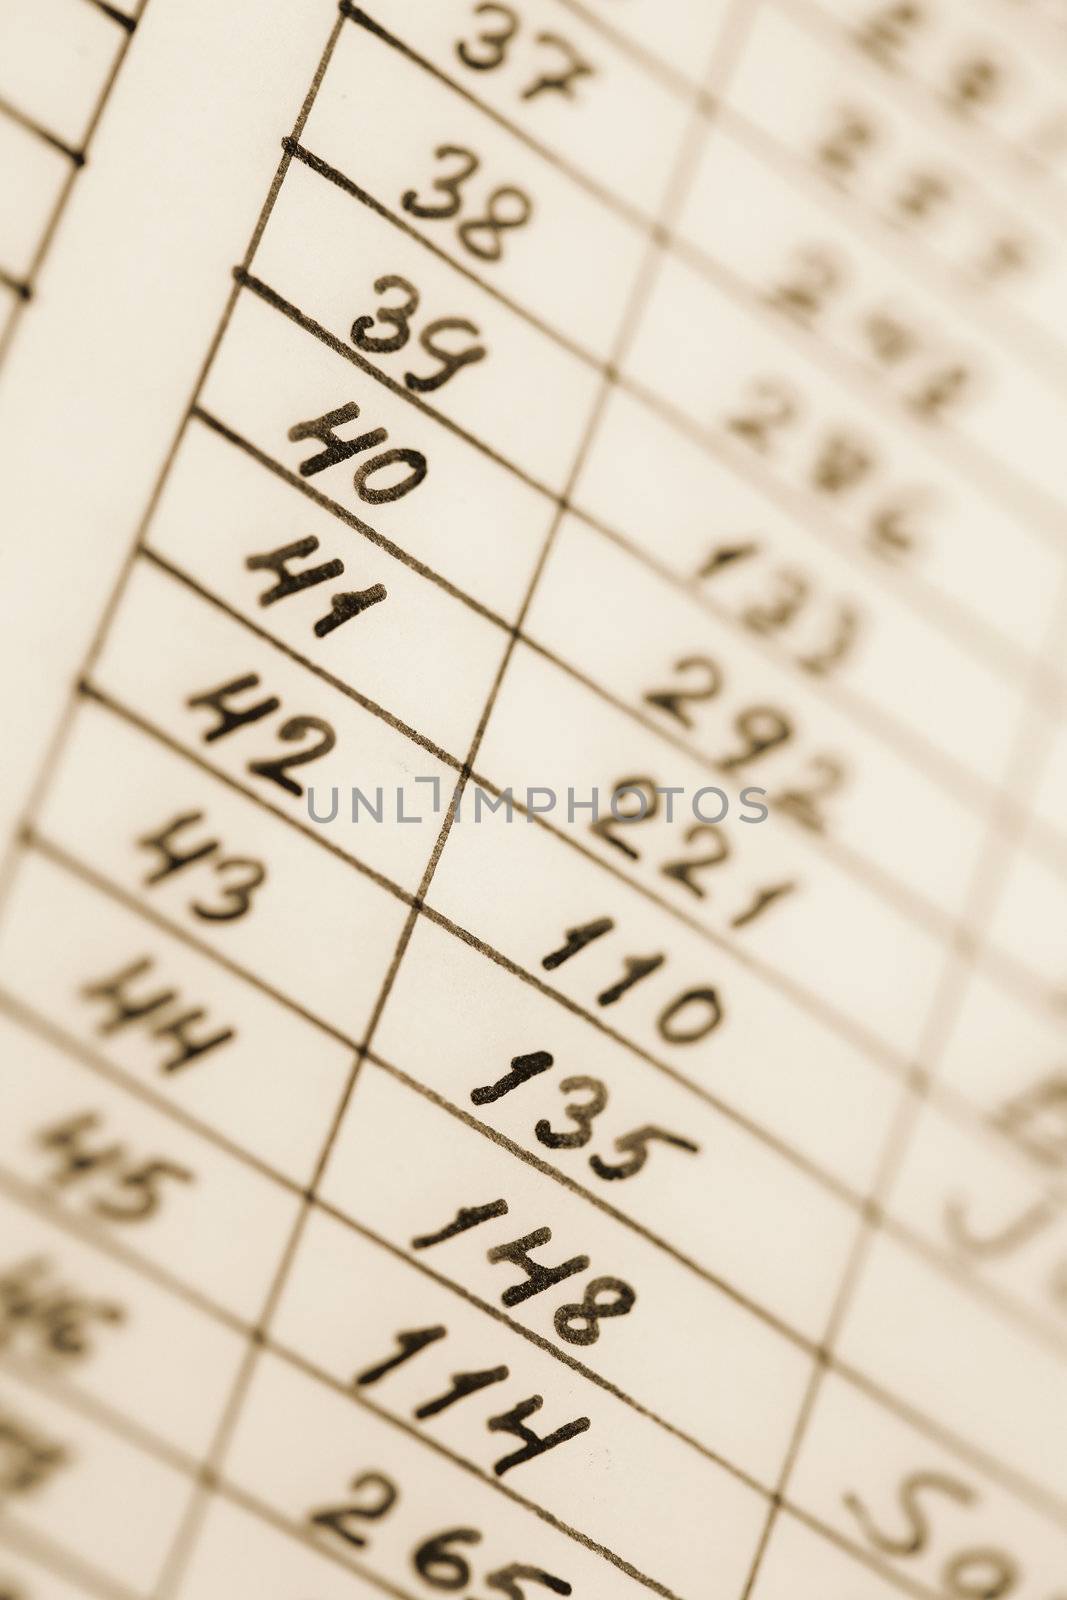 Table of hand written numbers. Short depth of field.